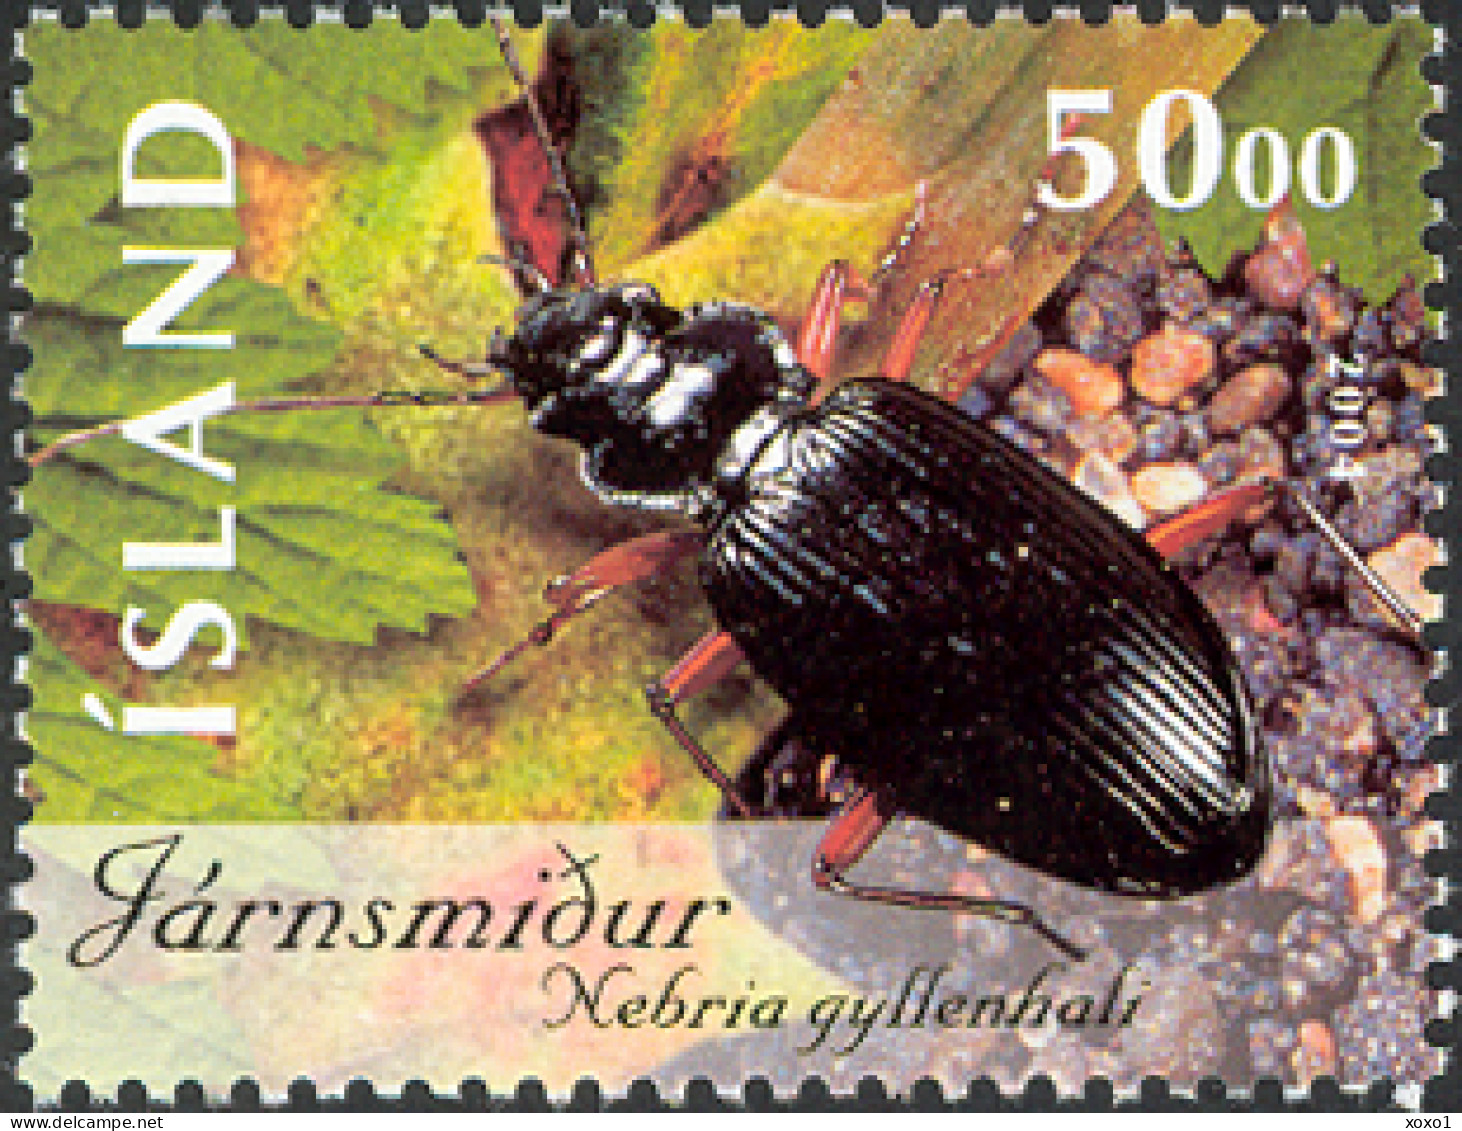 Iceland 2004 MiNr. 1075 - 1076 Island Insects And Spiders  # 1     2v  MNH** 3.50 € - Coleotteri